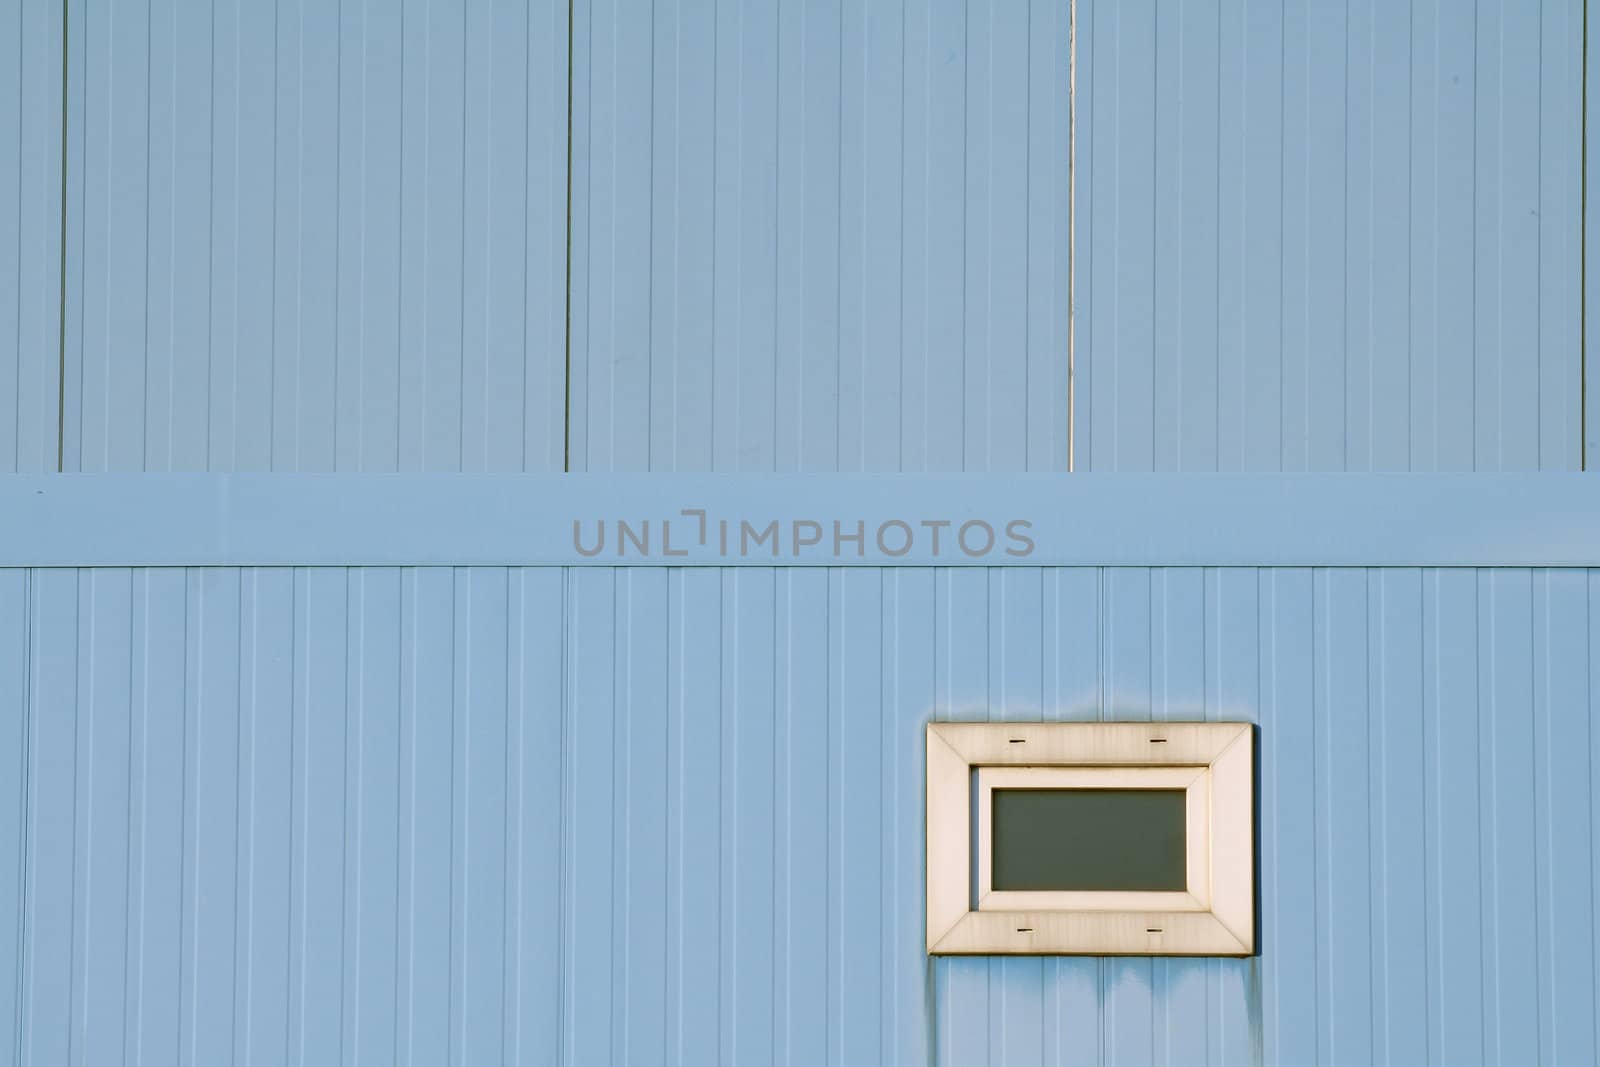 Very small window in blue industrial facade. Focus on lower half, which is the foreground. Geometrical abstract.